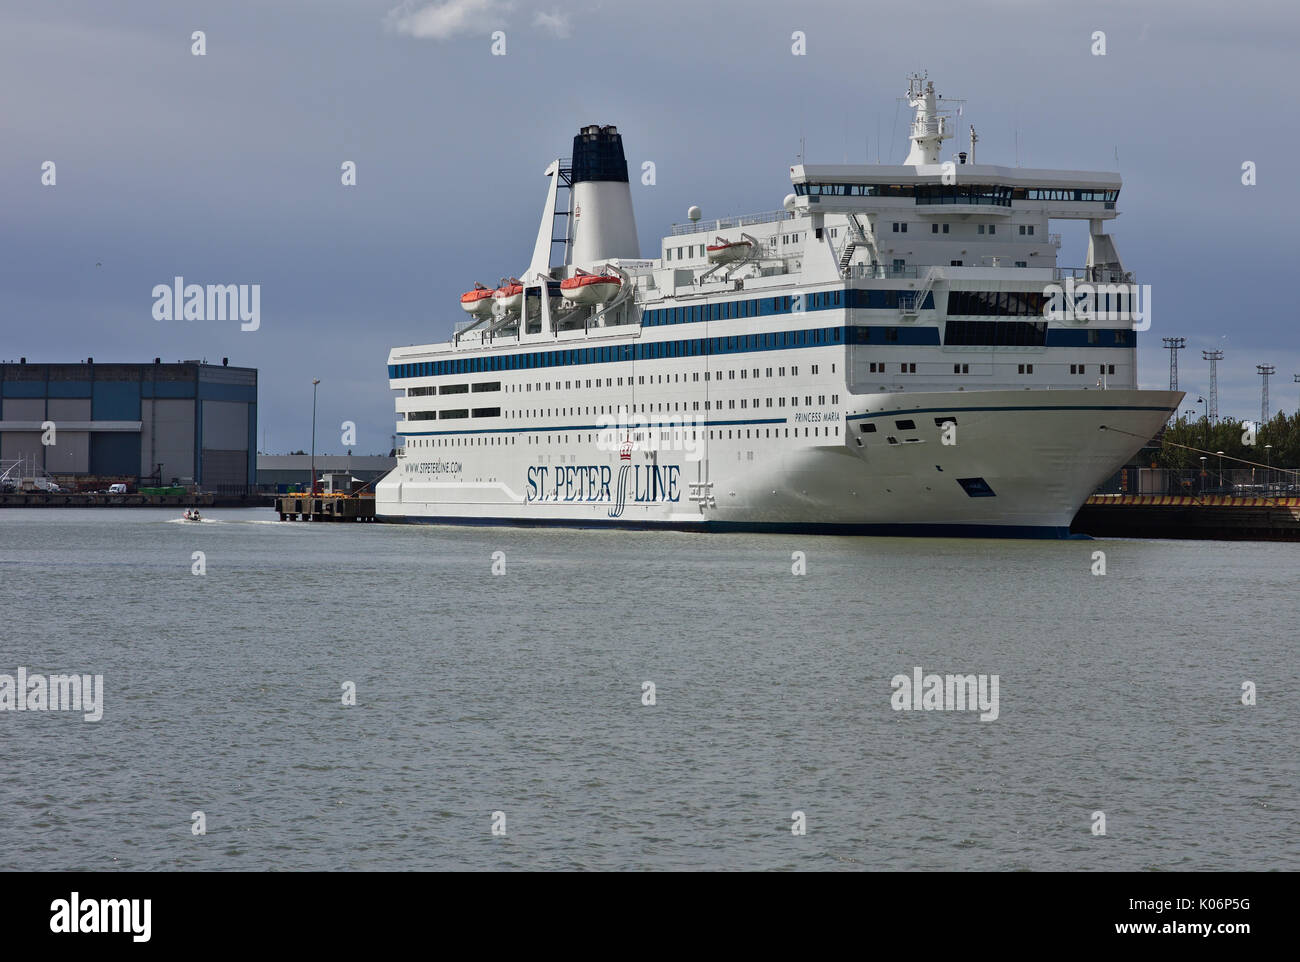 MS Princess Maria, St Peter Line, moored in Helsinki Stock Photo